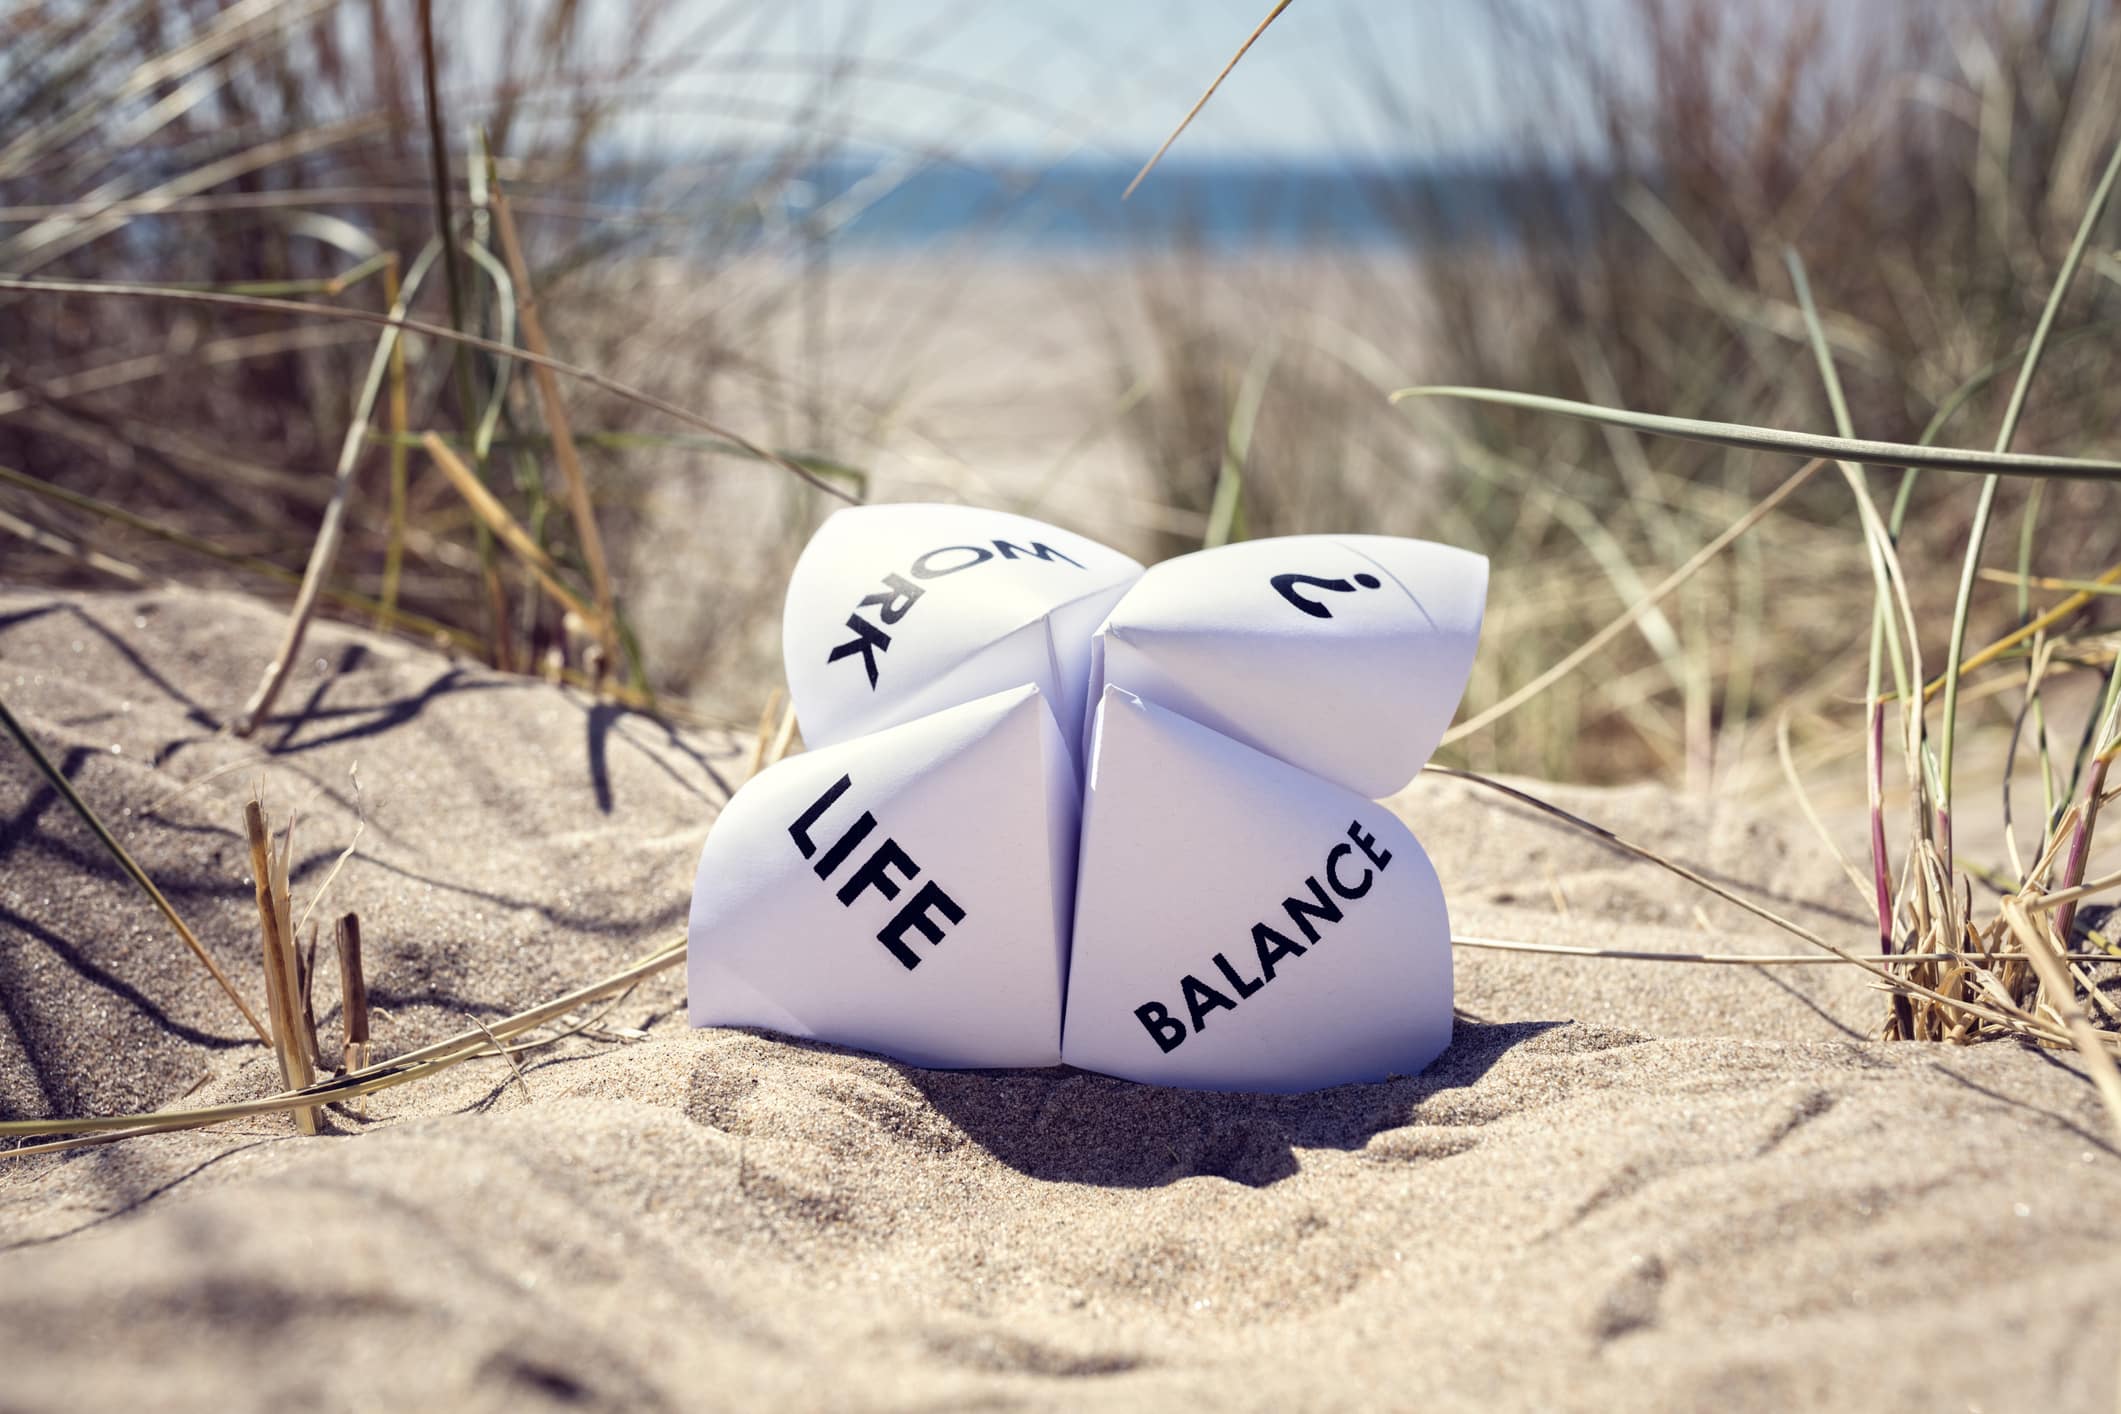 Origami fortune teller on vacation at the beach concept for work life balance choices